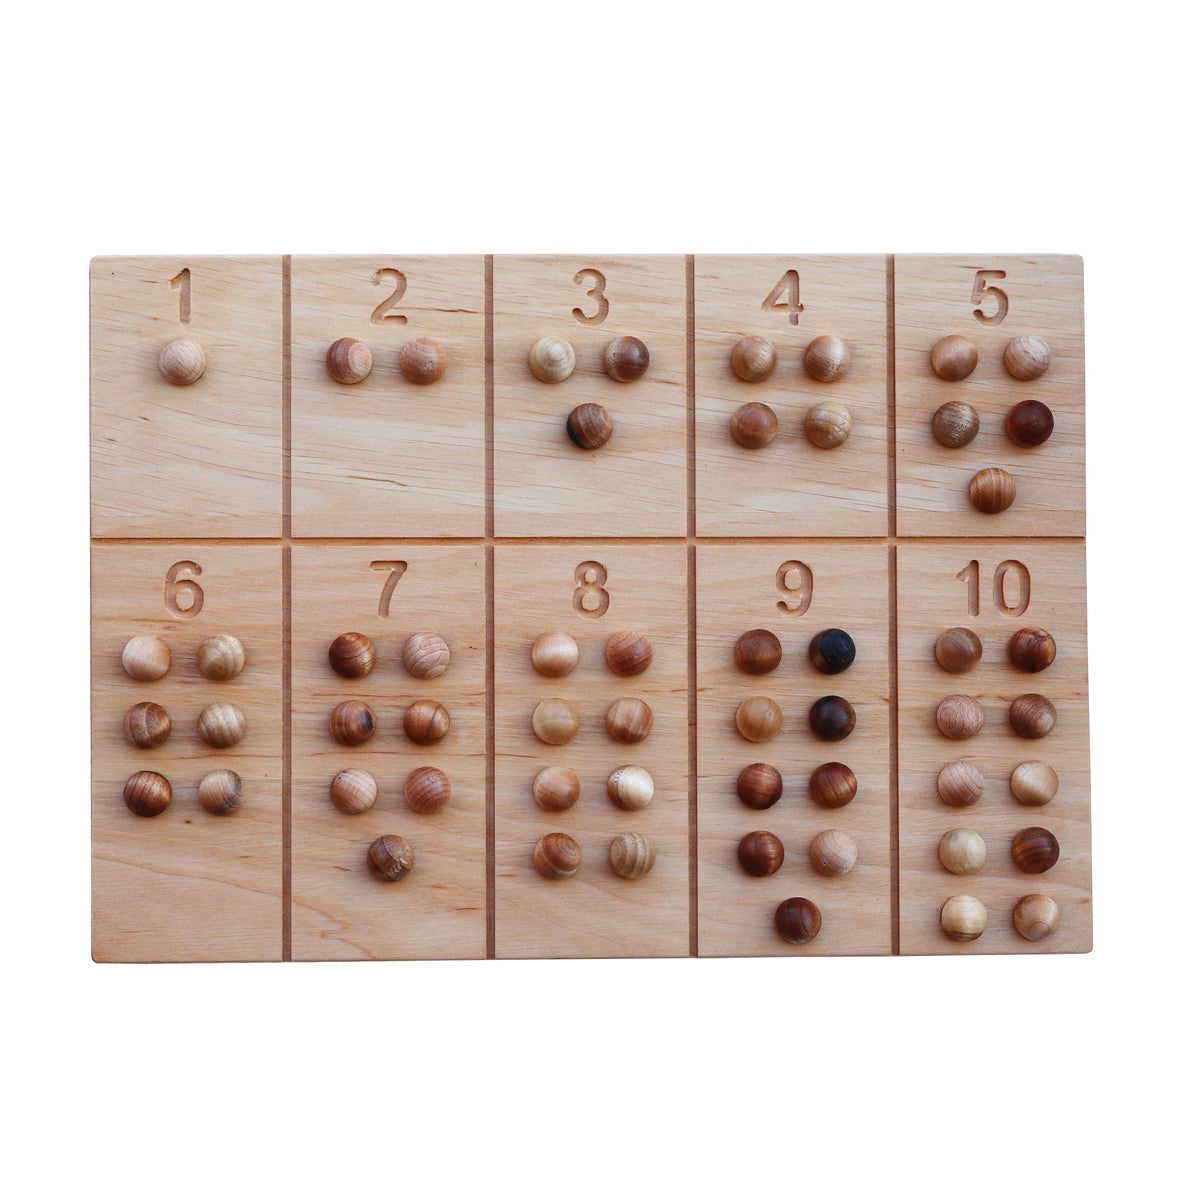 Number Tracking Board: With balls